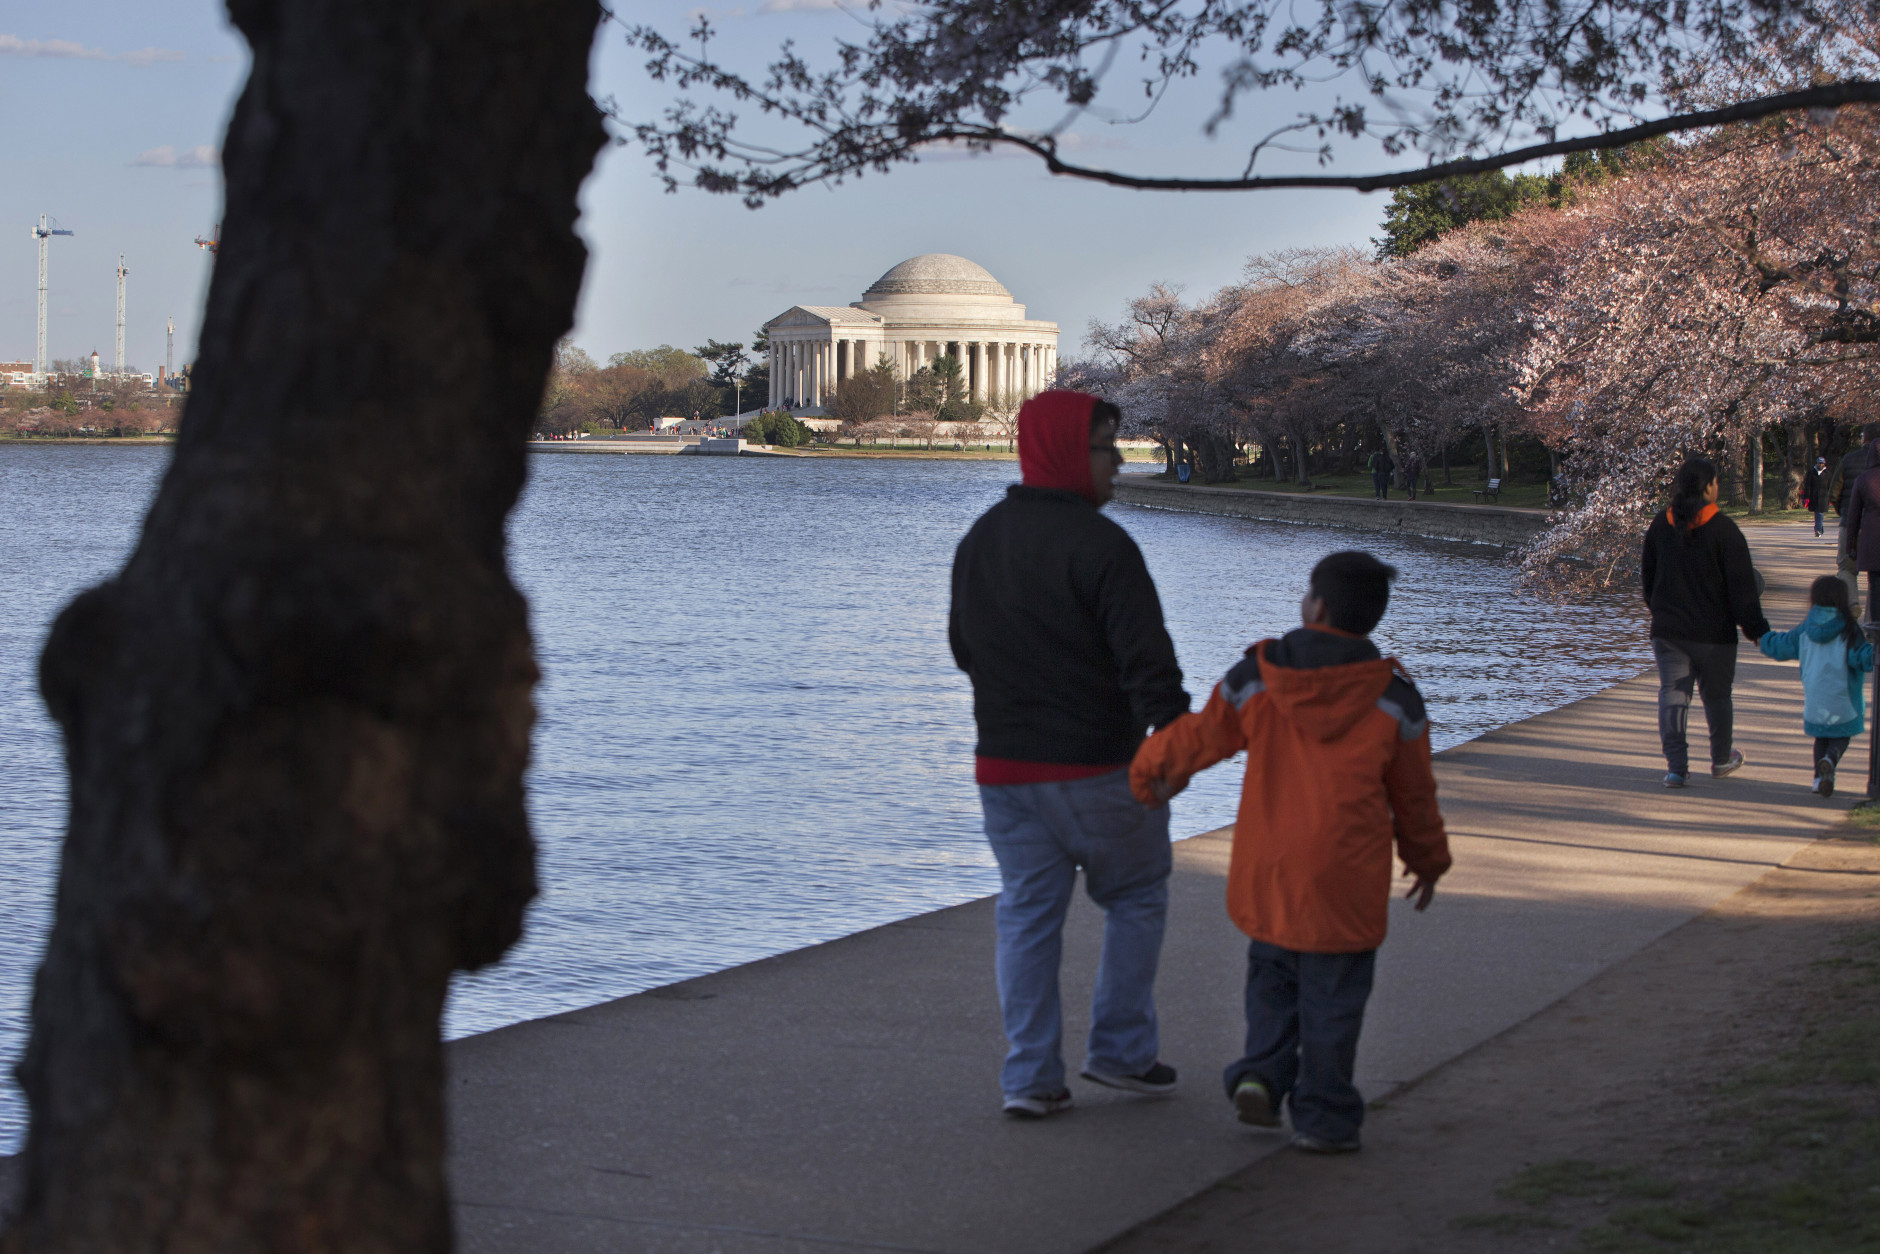 With the Jefferson Memorial in the background, bundled up families walk past cherry blossom trees along the tidal basin in Washington, Monday, March 21, 2016. The trees are expected to hit peak bloom later this week, despite current cold temperatures, according to the National Park Service. (AP Photo/Jacquelyn Martin)